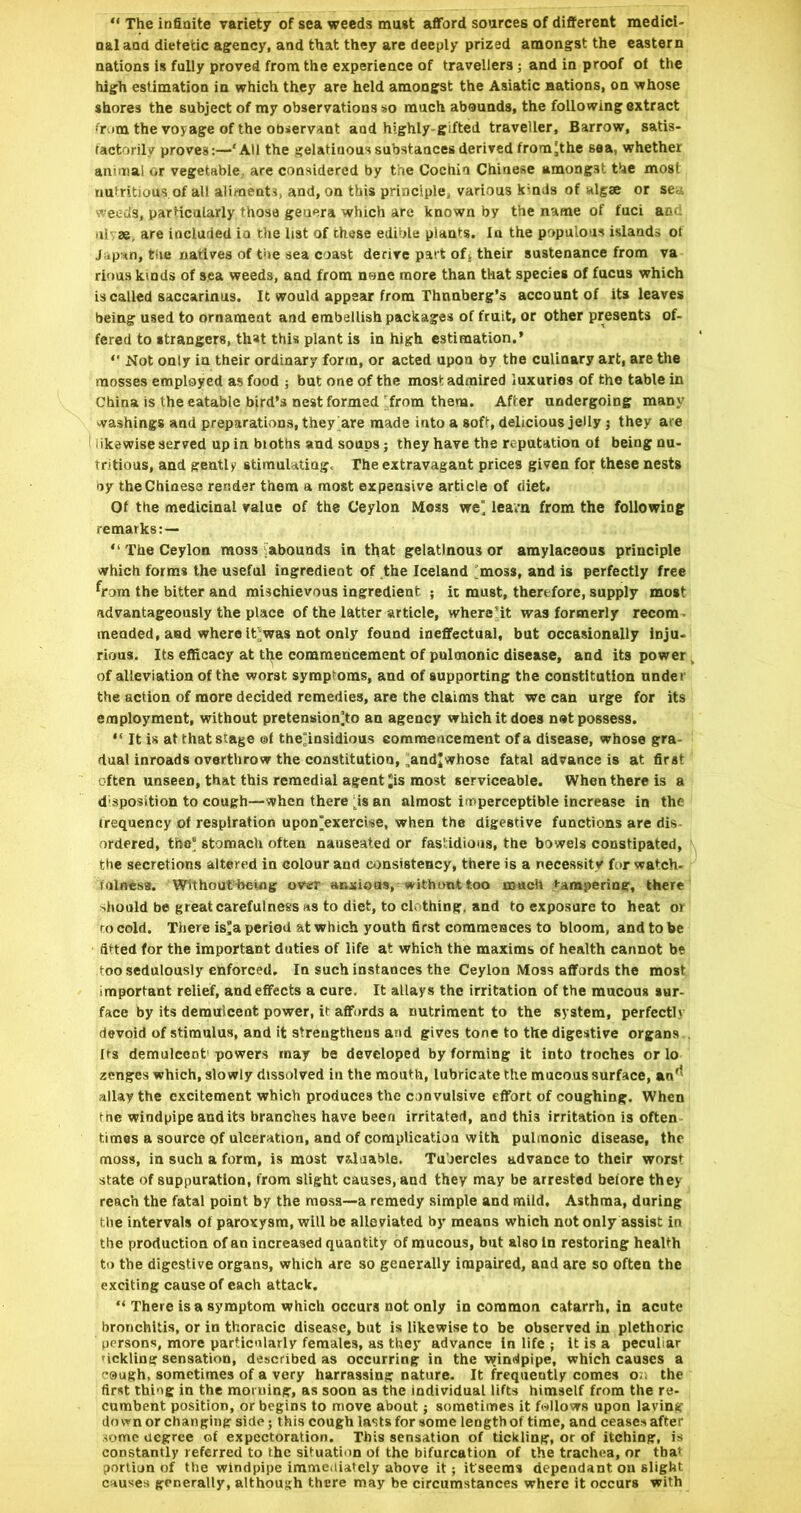 “ The infinite variety of sea weeds must afford sources of different medici- nal and dietetic agency, and that they are deeply prized amongst the eastern nations is fully proved from the experience of travellers ; and in proof of the high estimation in which they are held amongst the Asiatic nations, on whose shores the subject of my observations so much abounds, the following extract fr.im the voyage of the Observant and highly-gifted traveller, Barrow, satis- tactorilv proves:—‘All the gelatinous substances derived frora'the sea, whether animal or vegetable are considered by the Cochin Chinese amongst the most nutritious of all alimeati, and, on this principle, various kmds of algae or se.i weeds, particularly those genera which are known by the name of fuci ao>. til' ae, are included in the list of these edible plants. In the populous islands ot J-ipvtn, tile natives of t'le sea coast derive part oft their sustenance from va rious kinds of sea weeds, and from none more than that species of fucus which is called saccarinus. It would appear from Thnnberg’s account of its leaves being used to ornament and embellish packages of fruit, or other presents of- fered to strangers, that this plant is in high estimation.’ “ Not only in their ordinary form, or acted upon by the culinary art, are the mosses employed as food ; but one of the most admired luxuries of the table in China is the eatable bird’s nest formed from them. After undergoing many washings and preparations, they are made Into a soft, delicious jelly j they are I likewise served up in bioths and soups; they have the reputation of being nu- tritious, and gently stimulating. The extravagant prices given for these nests oy the Chinese render them a most expensive article of diet. Of the medicinal value of the Ceylon Mess we' learn from the following remarks:— “ The Ceylon moss iabounds in that gelatinous or amylaceous principle which forms the useful ingredient of the Iceland 'moss, and is perfectly free ^rorn the bitter and mischievous ingredient ; it must, therefore, supply most advantageously the place of the latter article, where’it was formerly recom • mended, aud where lt';was not only found ineffectual, but occasionally Inju. rious. Its efficacy at tl^e commencement of pulmonic disease, and its power of alleviation of the worst symptoms, and of supporting the constitution nnder the action of more decided remedies, are the claims that we can urge for its employment, without pretension]to an agency which it does nat possess. “ It is at that stage ©f the^nsidious commencement of a disease, whose gra- dual inroads overthrow the coastitutiou, ,andjwhose fatal advance is at first often unseen, that this remedial agent *is most serviceable. When there is a disposition to cough—when there i^is an almost imperceptible increase in the trequency of respiration upon^exerclse, when the digestive functions are dis- ordered, the’ stomach often nauseated or fastidious, the bowels constipated, the secretions altered in colour and consistency, there is a necessity for watch- fulness. Withouthetog ovam anxious, withimt too much tampering, there -.hould be great carefulness «s to diet, to clothing, and to exposure to heat or ro cold. There is> period at which youth first commences to bloom, and to be fitted for the important duties of life at which the maxims of health cannot be too sedulously enforced. In such instances the Ceylon Moss affords the most important relief, and effects a cure. It allays the irritation of the mucous sur- face by its demulcent power, it affords a nutriment to the system, perfectly devoid of stimulus, and it strengthens and gives tone to the digestive organs . Its demulcent' powers may be developed by forming it into troches or lo zenges which, slowly dissolved in the mouth, lubricate the mucous surface, an'^ allay the excitement which produces the convulsive effort of coughing. When fne windpipe audits branches have been irritated, and this irritation is often times a source of ulceration, and of compUcatioa with pulmonic disease, the moss, in such a form, is most valuable. Tubercles advance to their worst state of suppuration, from slight causes, and they may be arrested before they reach the fatal point by the moss—a remedy simple and mild. Asthma, during the intervals ot paroxysm, will be alleviated by means which not only assist in the production of an increased quantity of mucous, but also In restoring health to the digestive organs, which are so generally impaired, and are so often the exciting cause of each attack. “ There is a symptom which occurs not only in common catarrh, in acute bronchitis, or in thoracic disease, but is likewise to be observed in plethoric persons, more particularly females, as they advance In life ; it is a peculiar Mckling sensation, described as occurring in the windpipe, which causes a C9ugh, sometimes of a very harrassing nature. It frequently comes o.. the first thing in the morning, as soon as the individual lifts himself from the re- cumbent position, or begins to move about j sometimes it follows upon laving down or changing side; this cough lasts for some length of time, and ceases after some degree of expectoration. This sensation of tickling, or of itching, is constantly referred to the situation of the bifurcation of the trachea, or tba* portion of the windpipe immediately above it; ifseems dependant on slight causes generally, although there may be circumstances where it occurs with